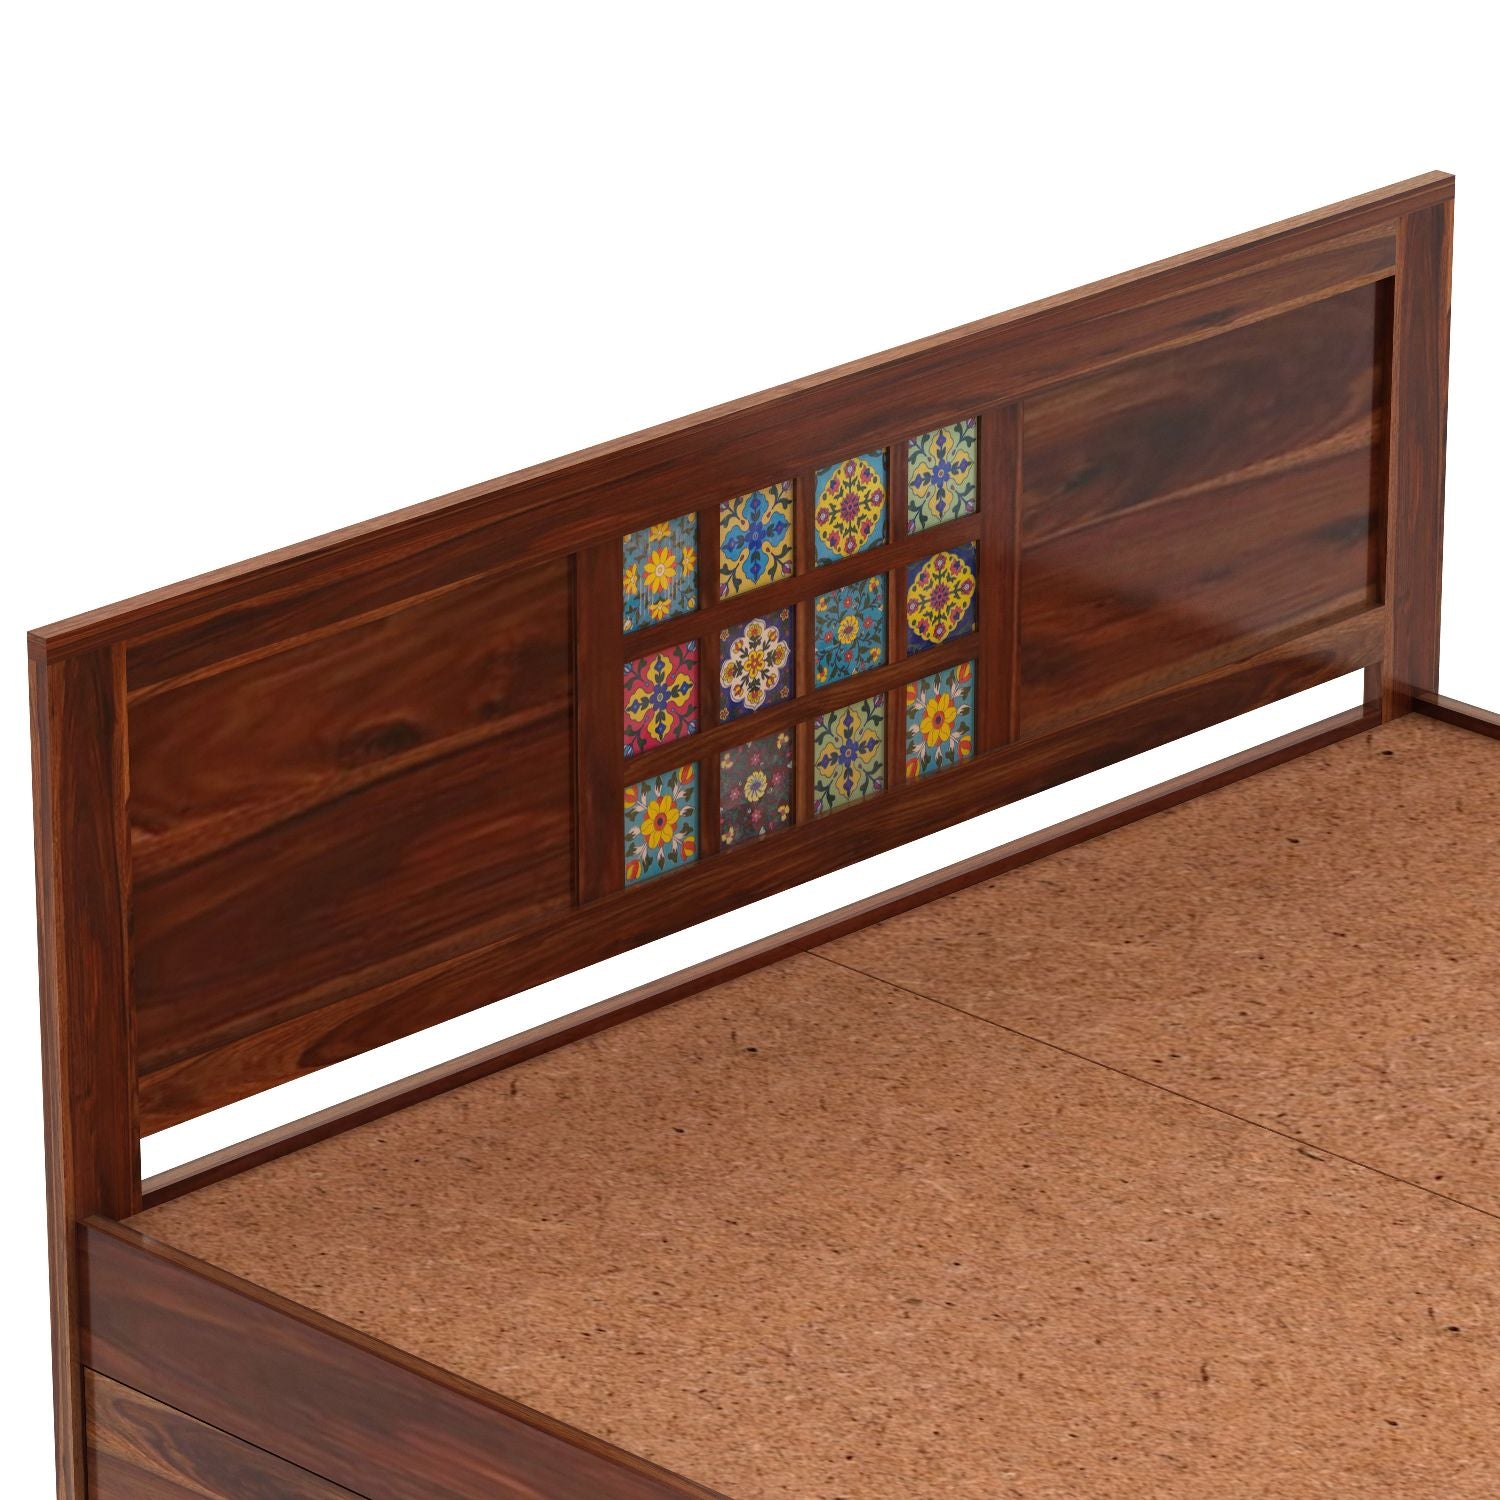 Dotwork Solid Sheesham Wood Bed With Four Drawers (Queen Size, Natural Finish)